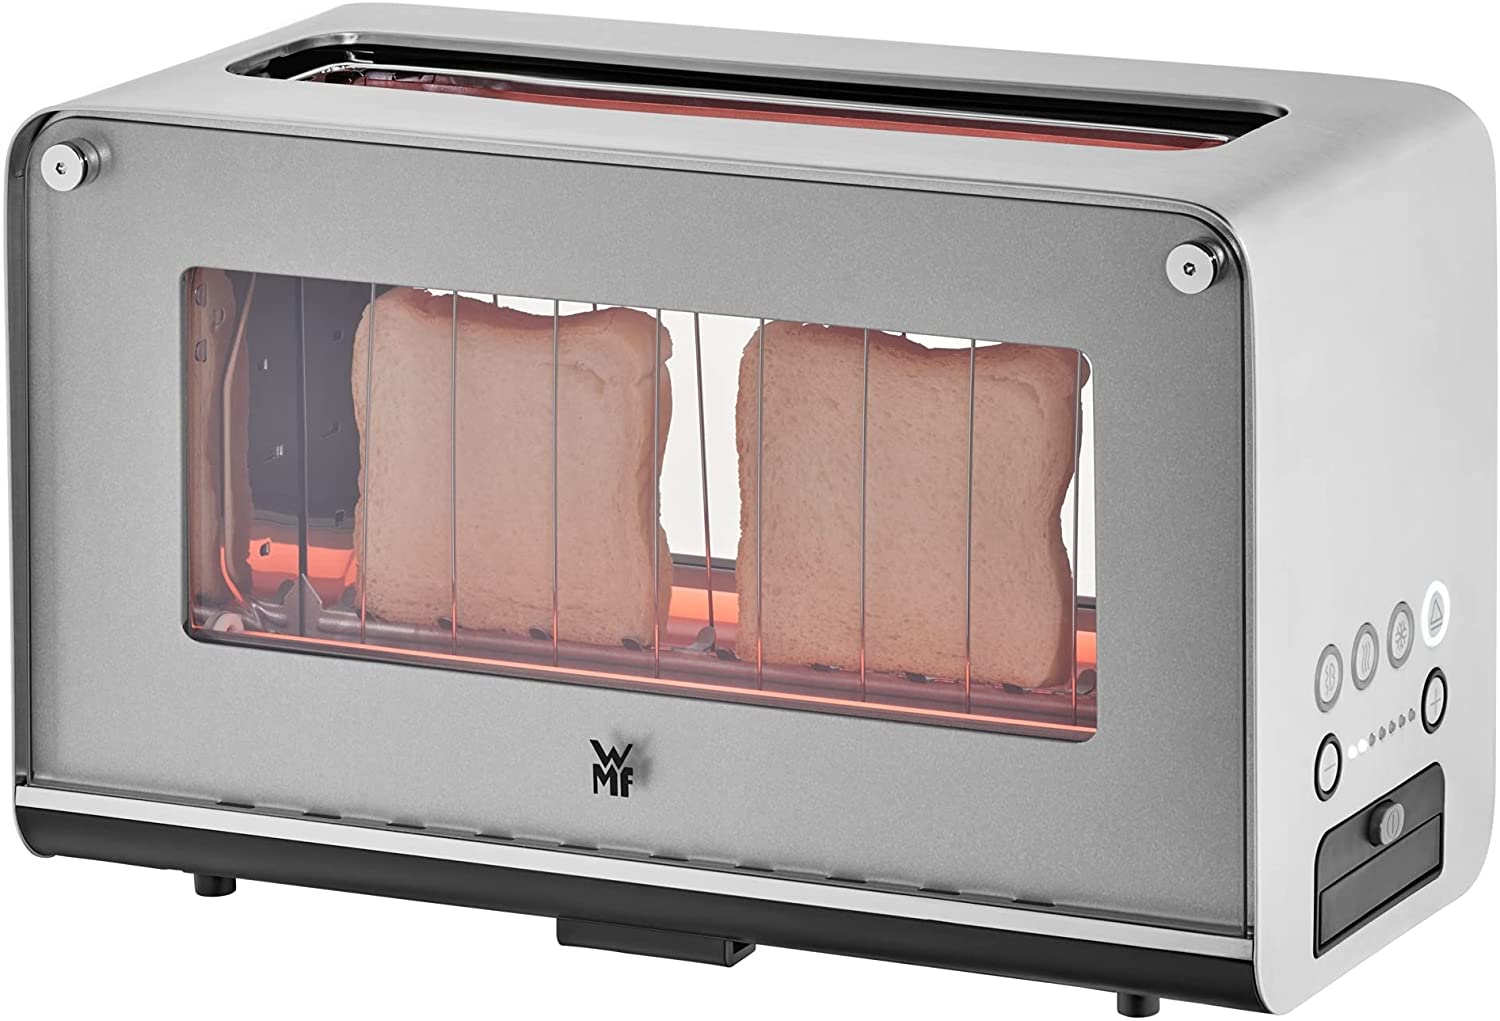 WMF Lono Toaster, Glass With Bread Roll Rack, 2 Slices, XXL, Motorised Toast Holder, Warming Function, 7 Browning Levels, Stainless Steel, Matt.